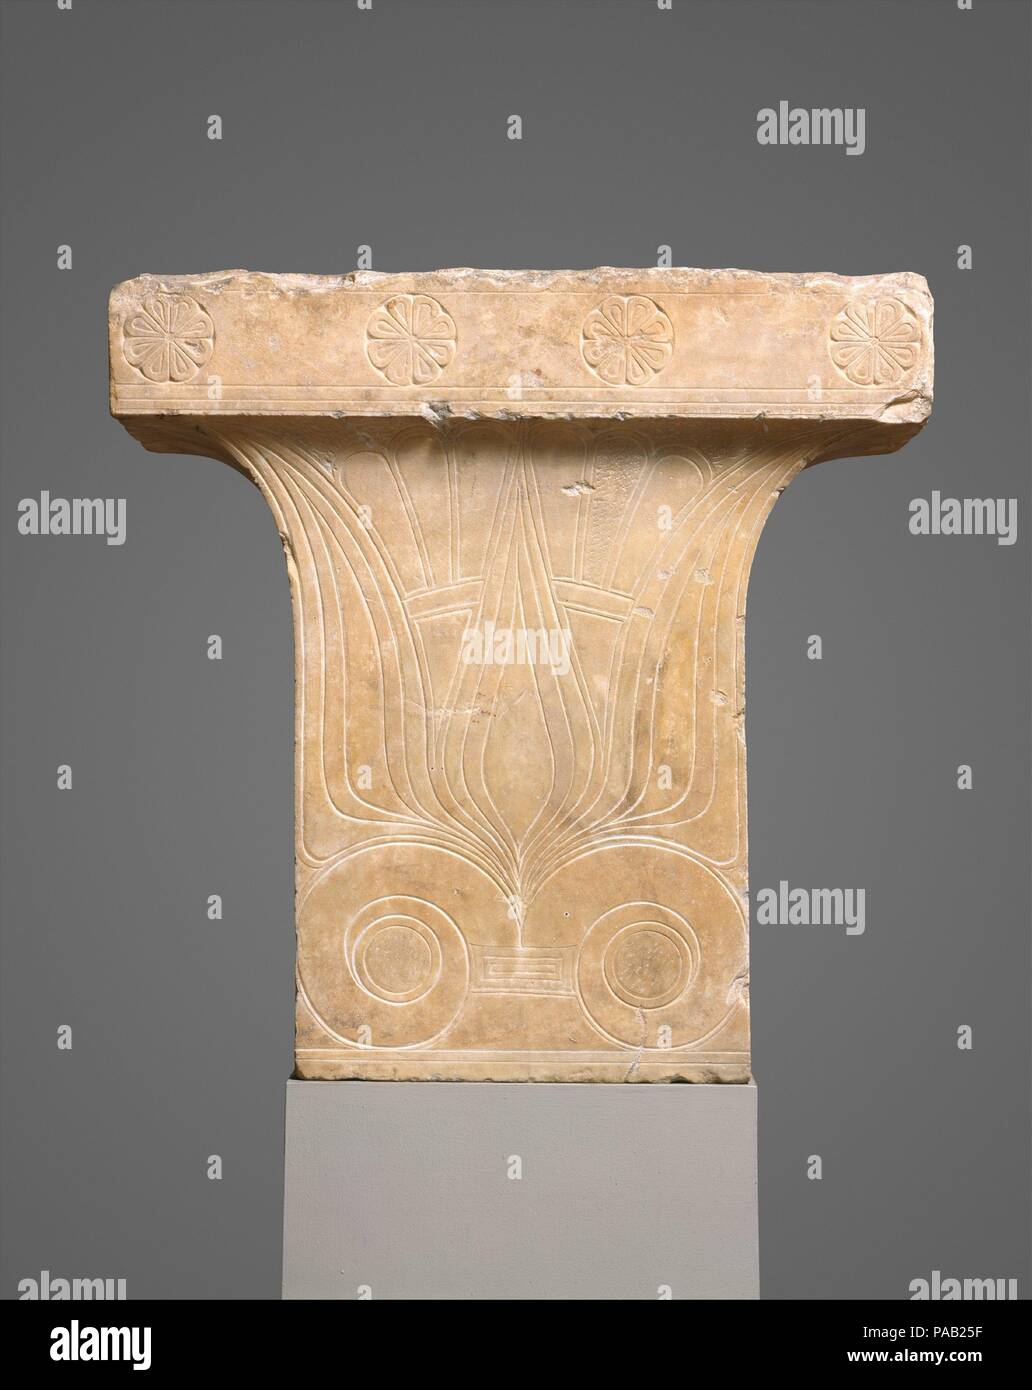 Marble cavetto capital. Culture: Greek, Attic. Dimensions: H. 24 15/16 in. (63.3 cm). Date: mid-6th century B.C..  This capital was part of a funerary or votive stele; it surmounted a tall shaft and supported a separately carved finial--presumably a sphinx.  The cavetto capital has a more elongated shape than the earlier example exhibited nearby. Museum: Metropolitan Museum of Art, New York, USA. Stock Photo